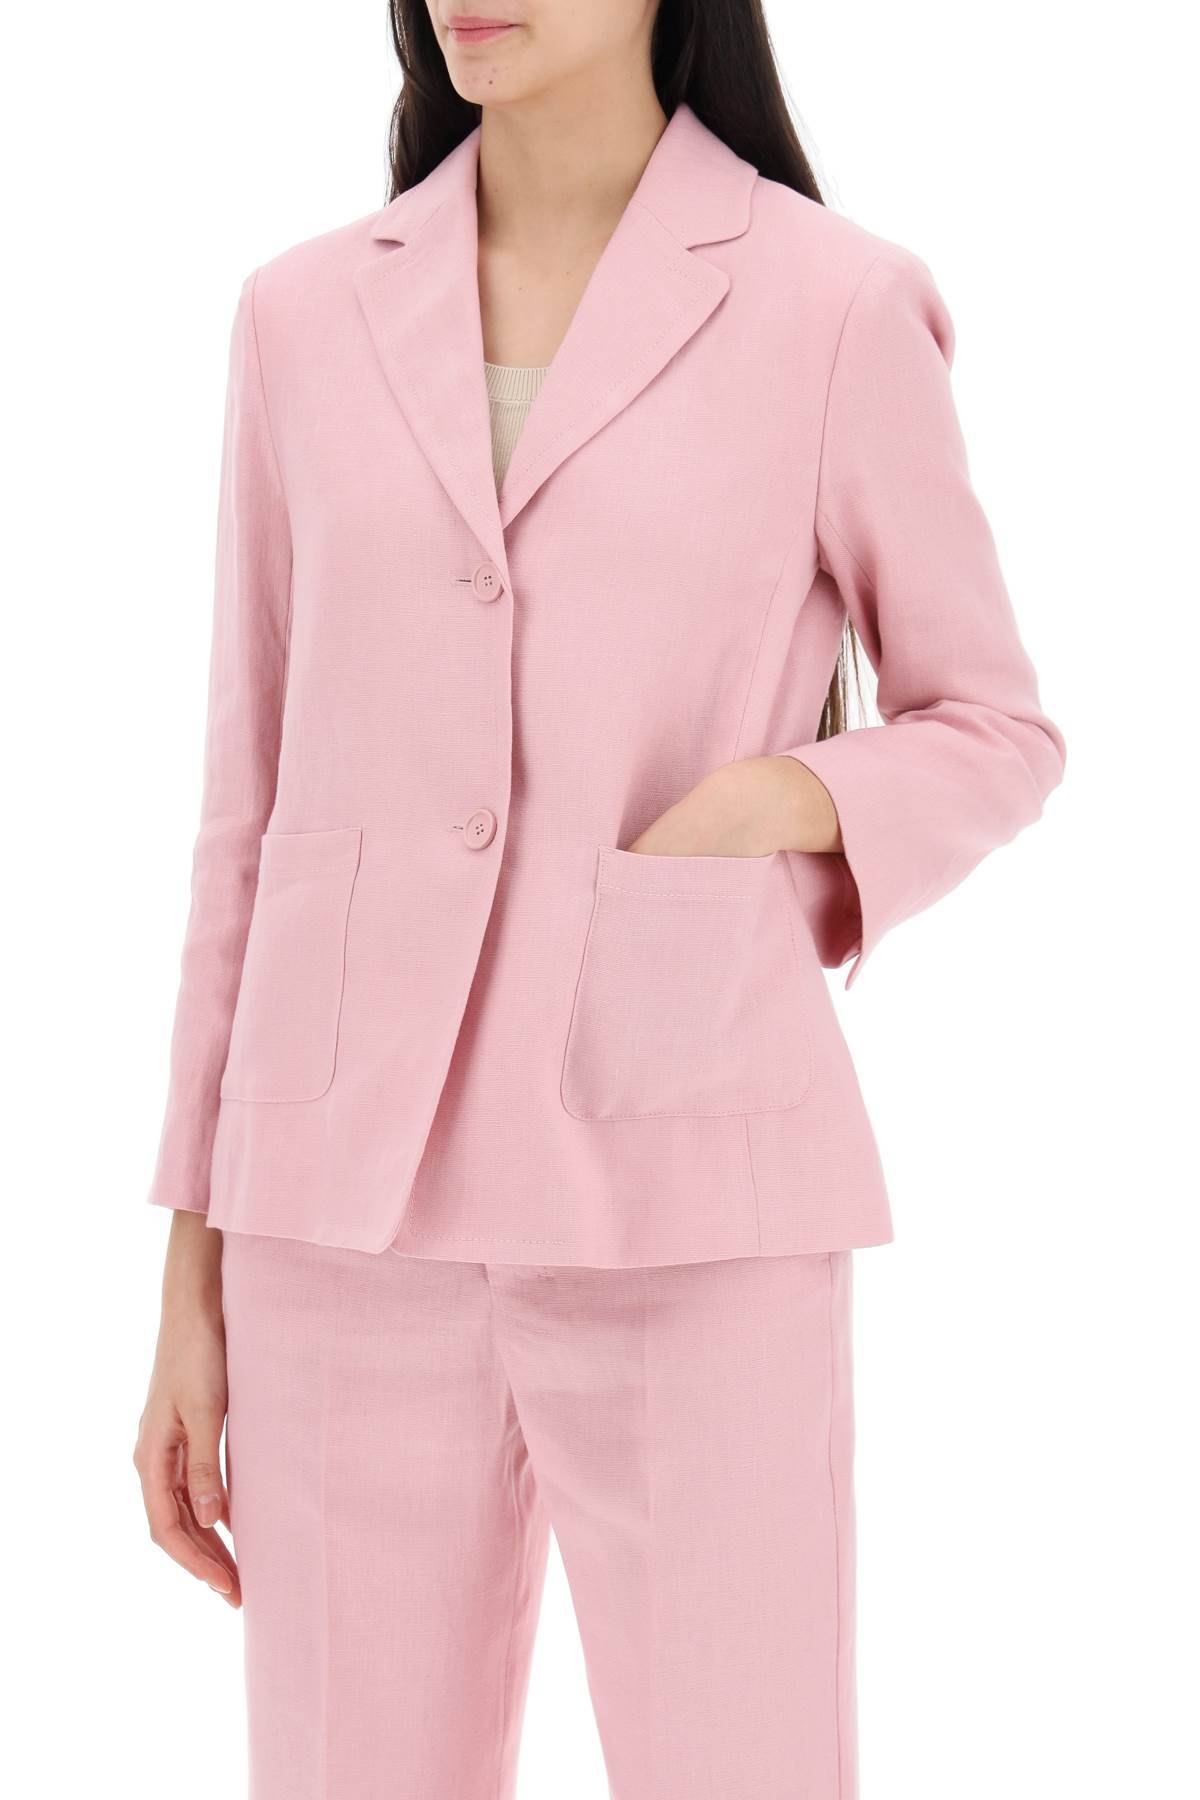 Shop 's Max Mara Socrates Single-breasted In Pink